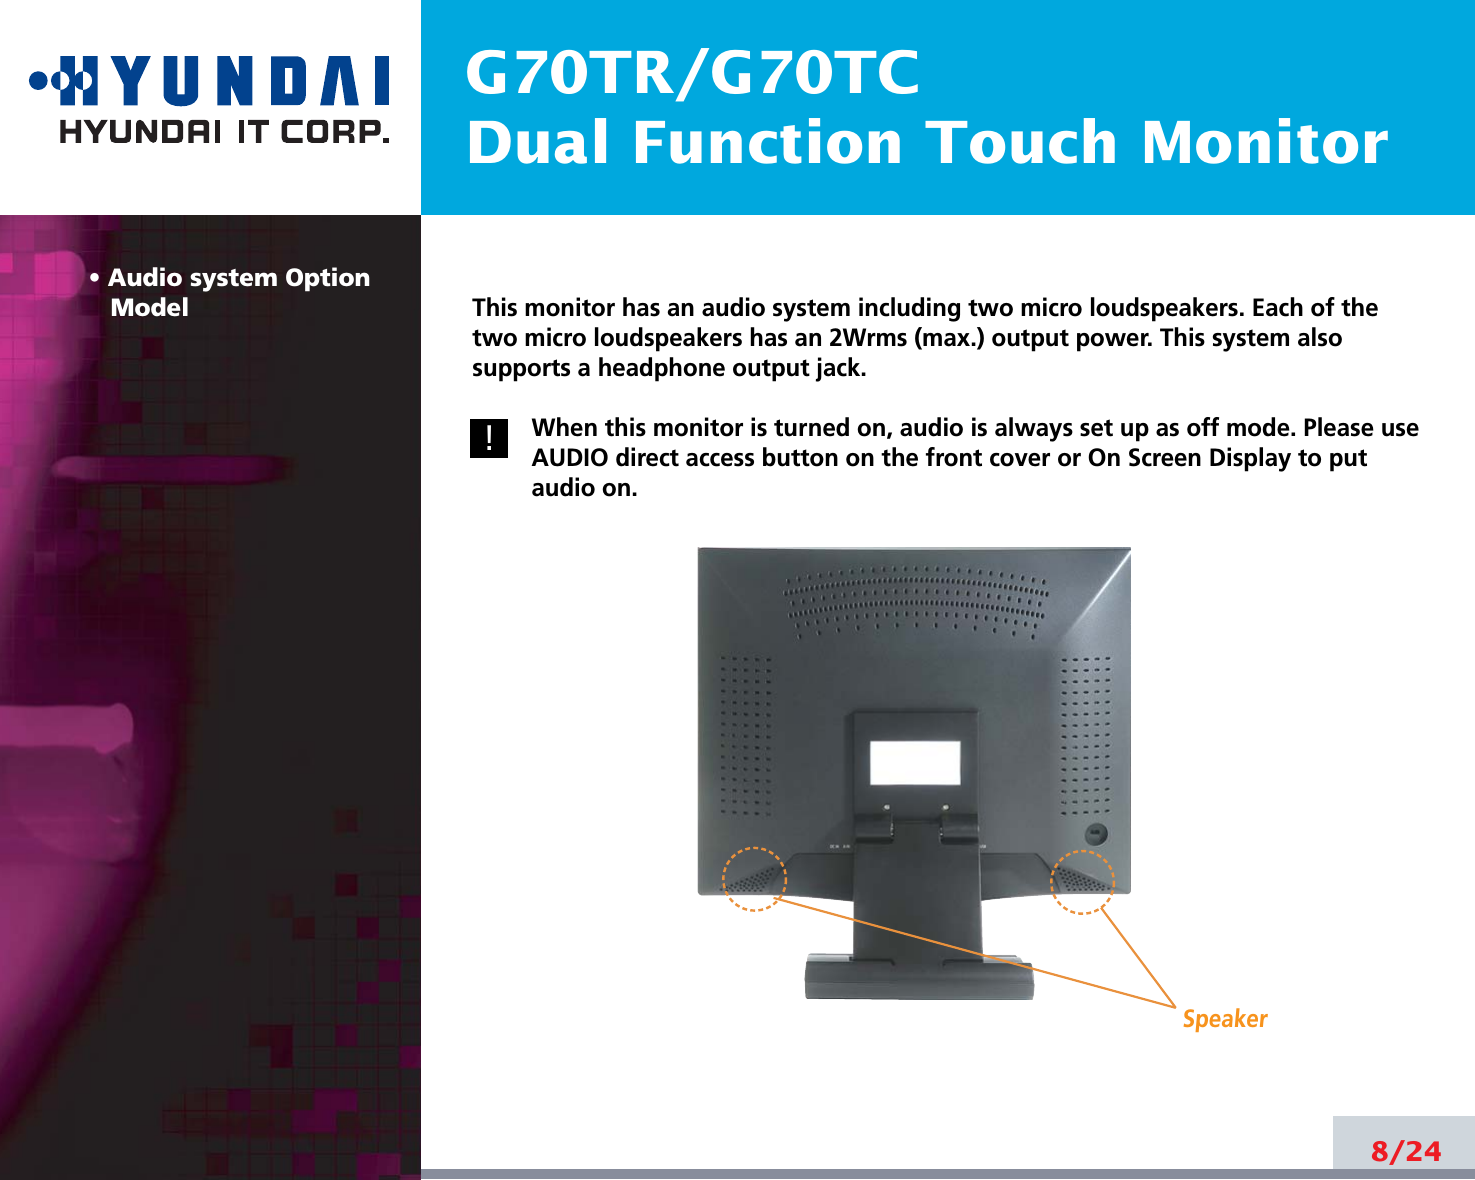 G70TR/G70TCDual Function Touch Monitor• Audio system OptionModel8/24!!This monitor has an audio system including two micro loudspeakers. Each of thetwo micro loudspeakers has an 2Wrms (max.) output power. This system alsosupports a headphone output jack.When this monitor is turned on, audio is always set up as off mode. Please useAUDIO direct access button on the front cover or On Screen Display to putaudio on. Speaker